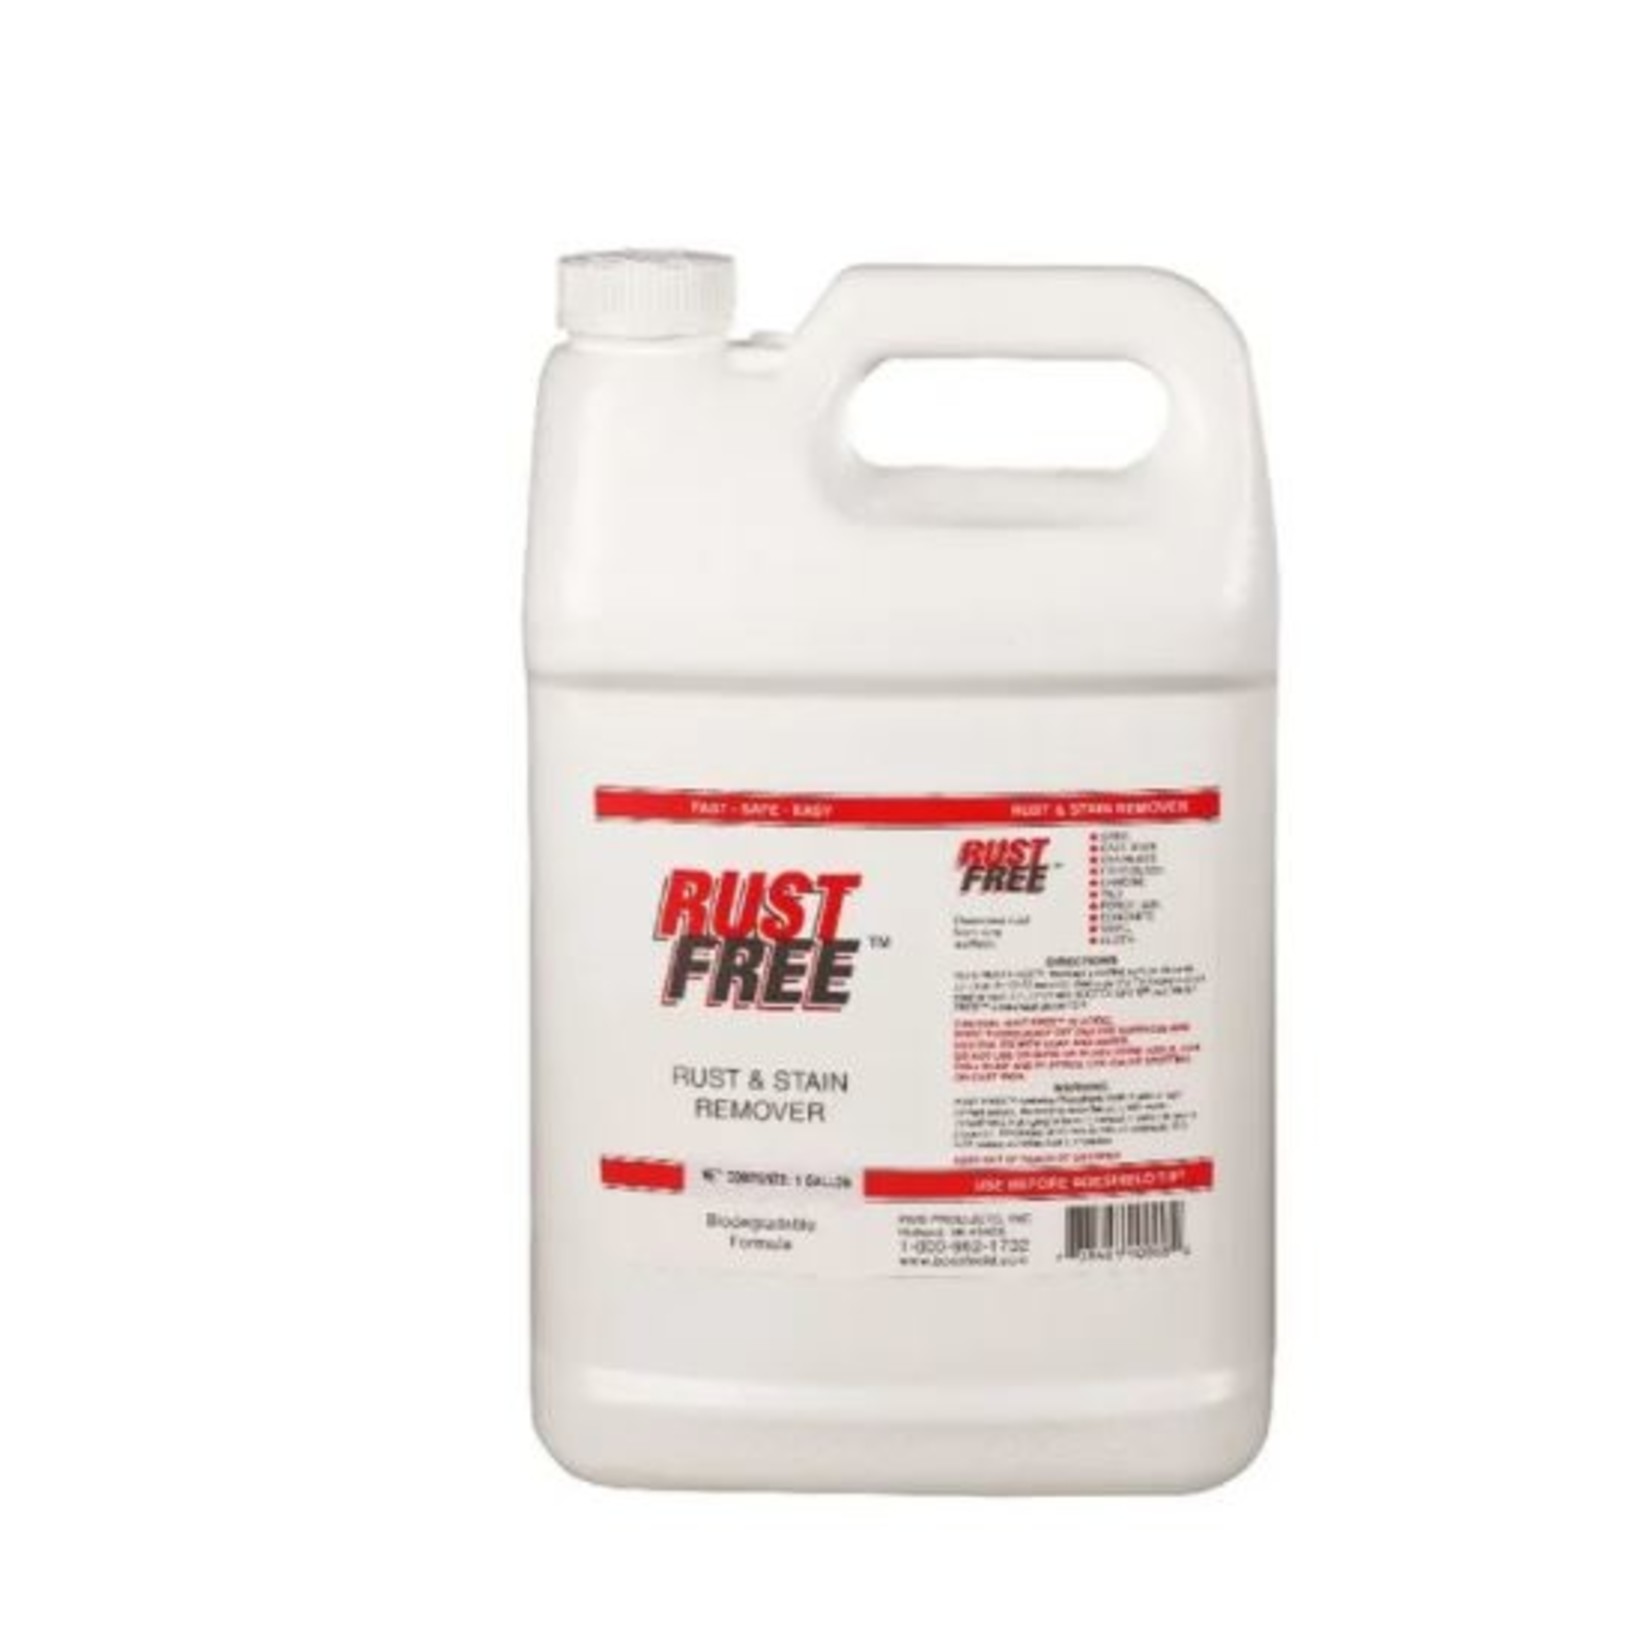 Boeshield Rust Free 1 Gallon - Rust and Stain Remover